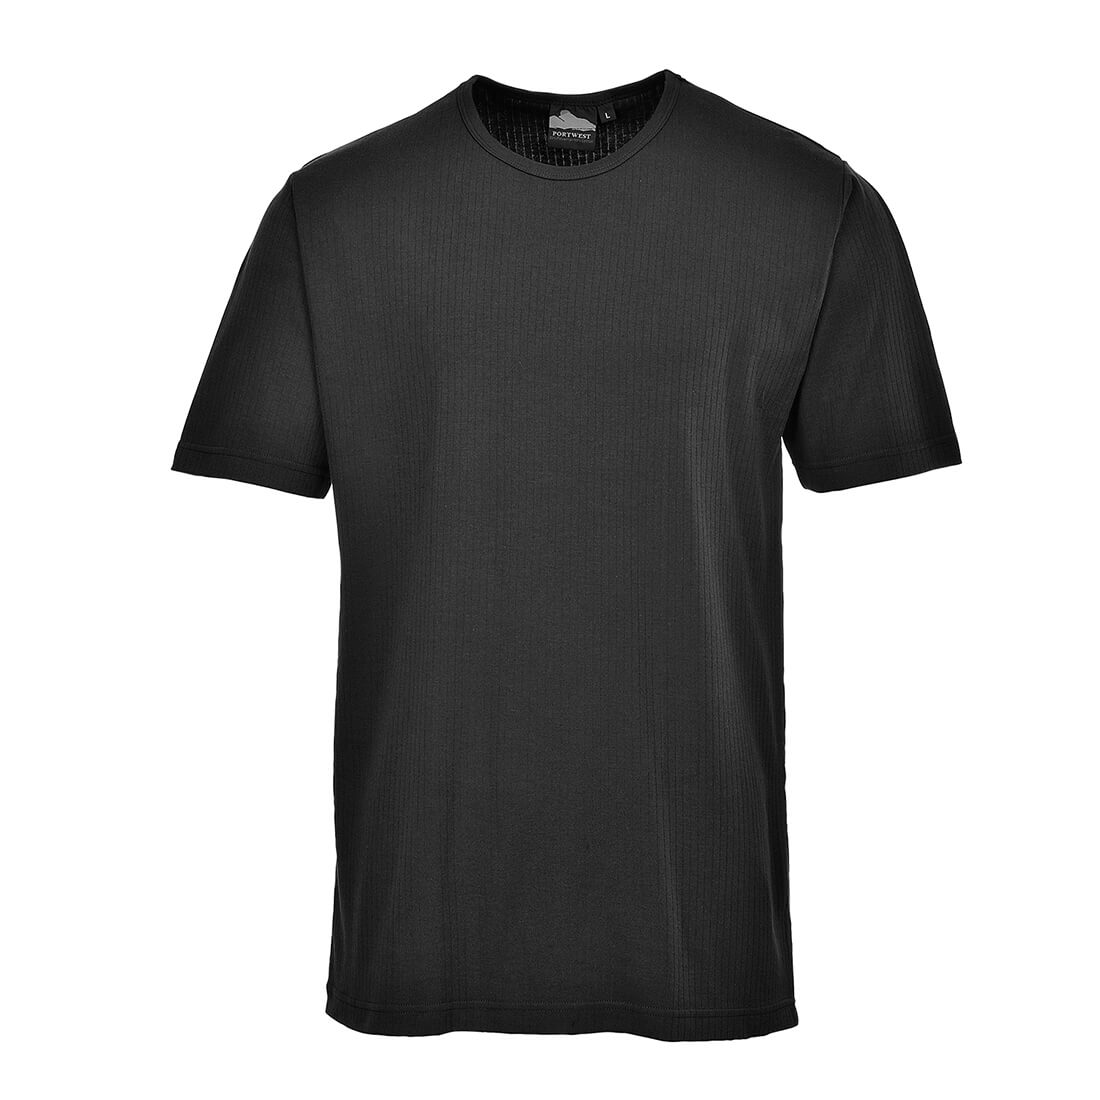 Photo of Portwest Thermal Short Sleeve T Shirt Black S